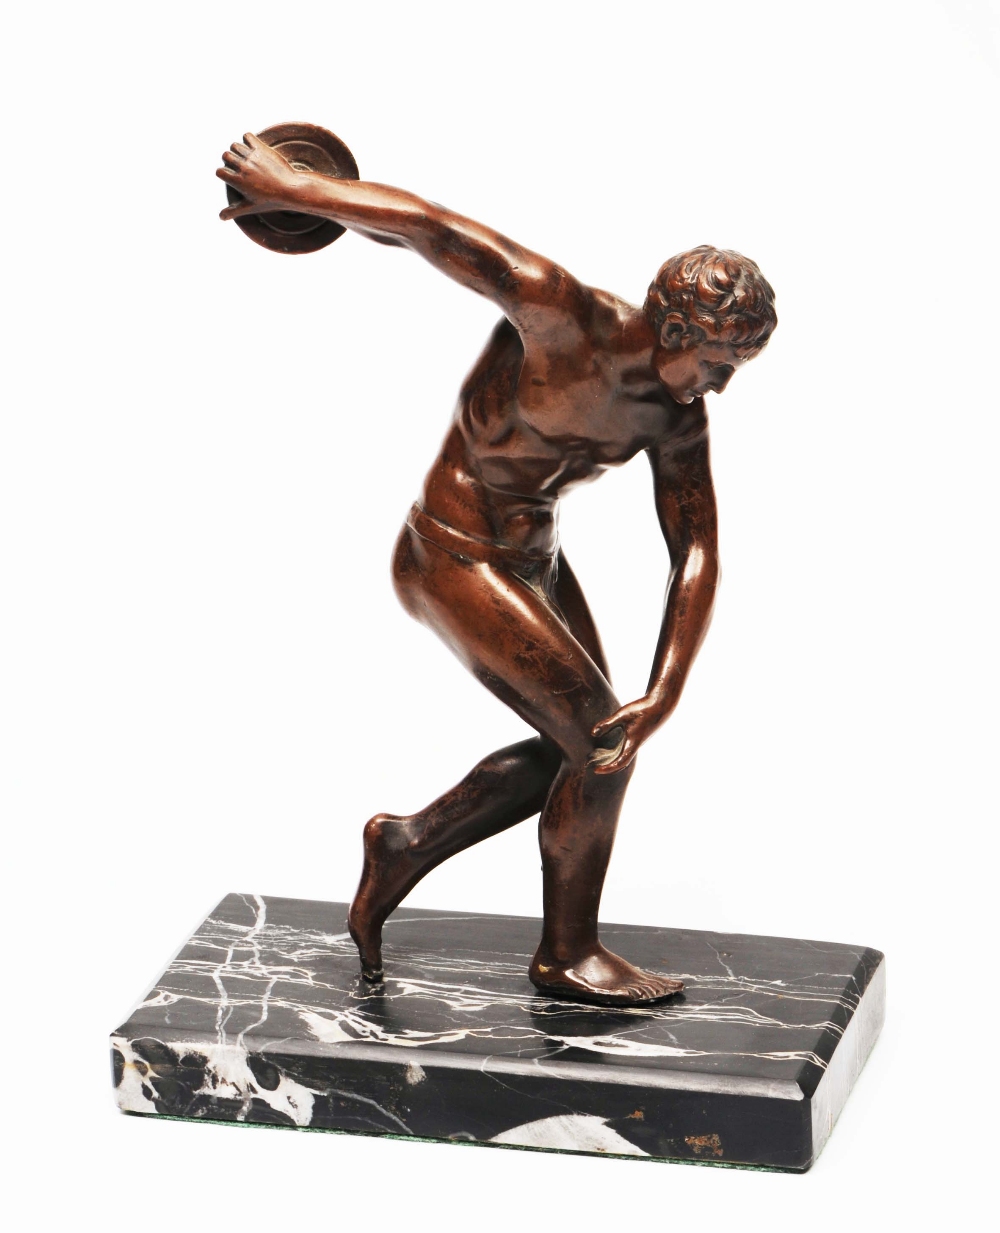 A BRONZED SCULPTURE of a discus thrower, mounted on a rectangular marble base, 22cm high overall